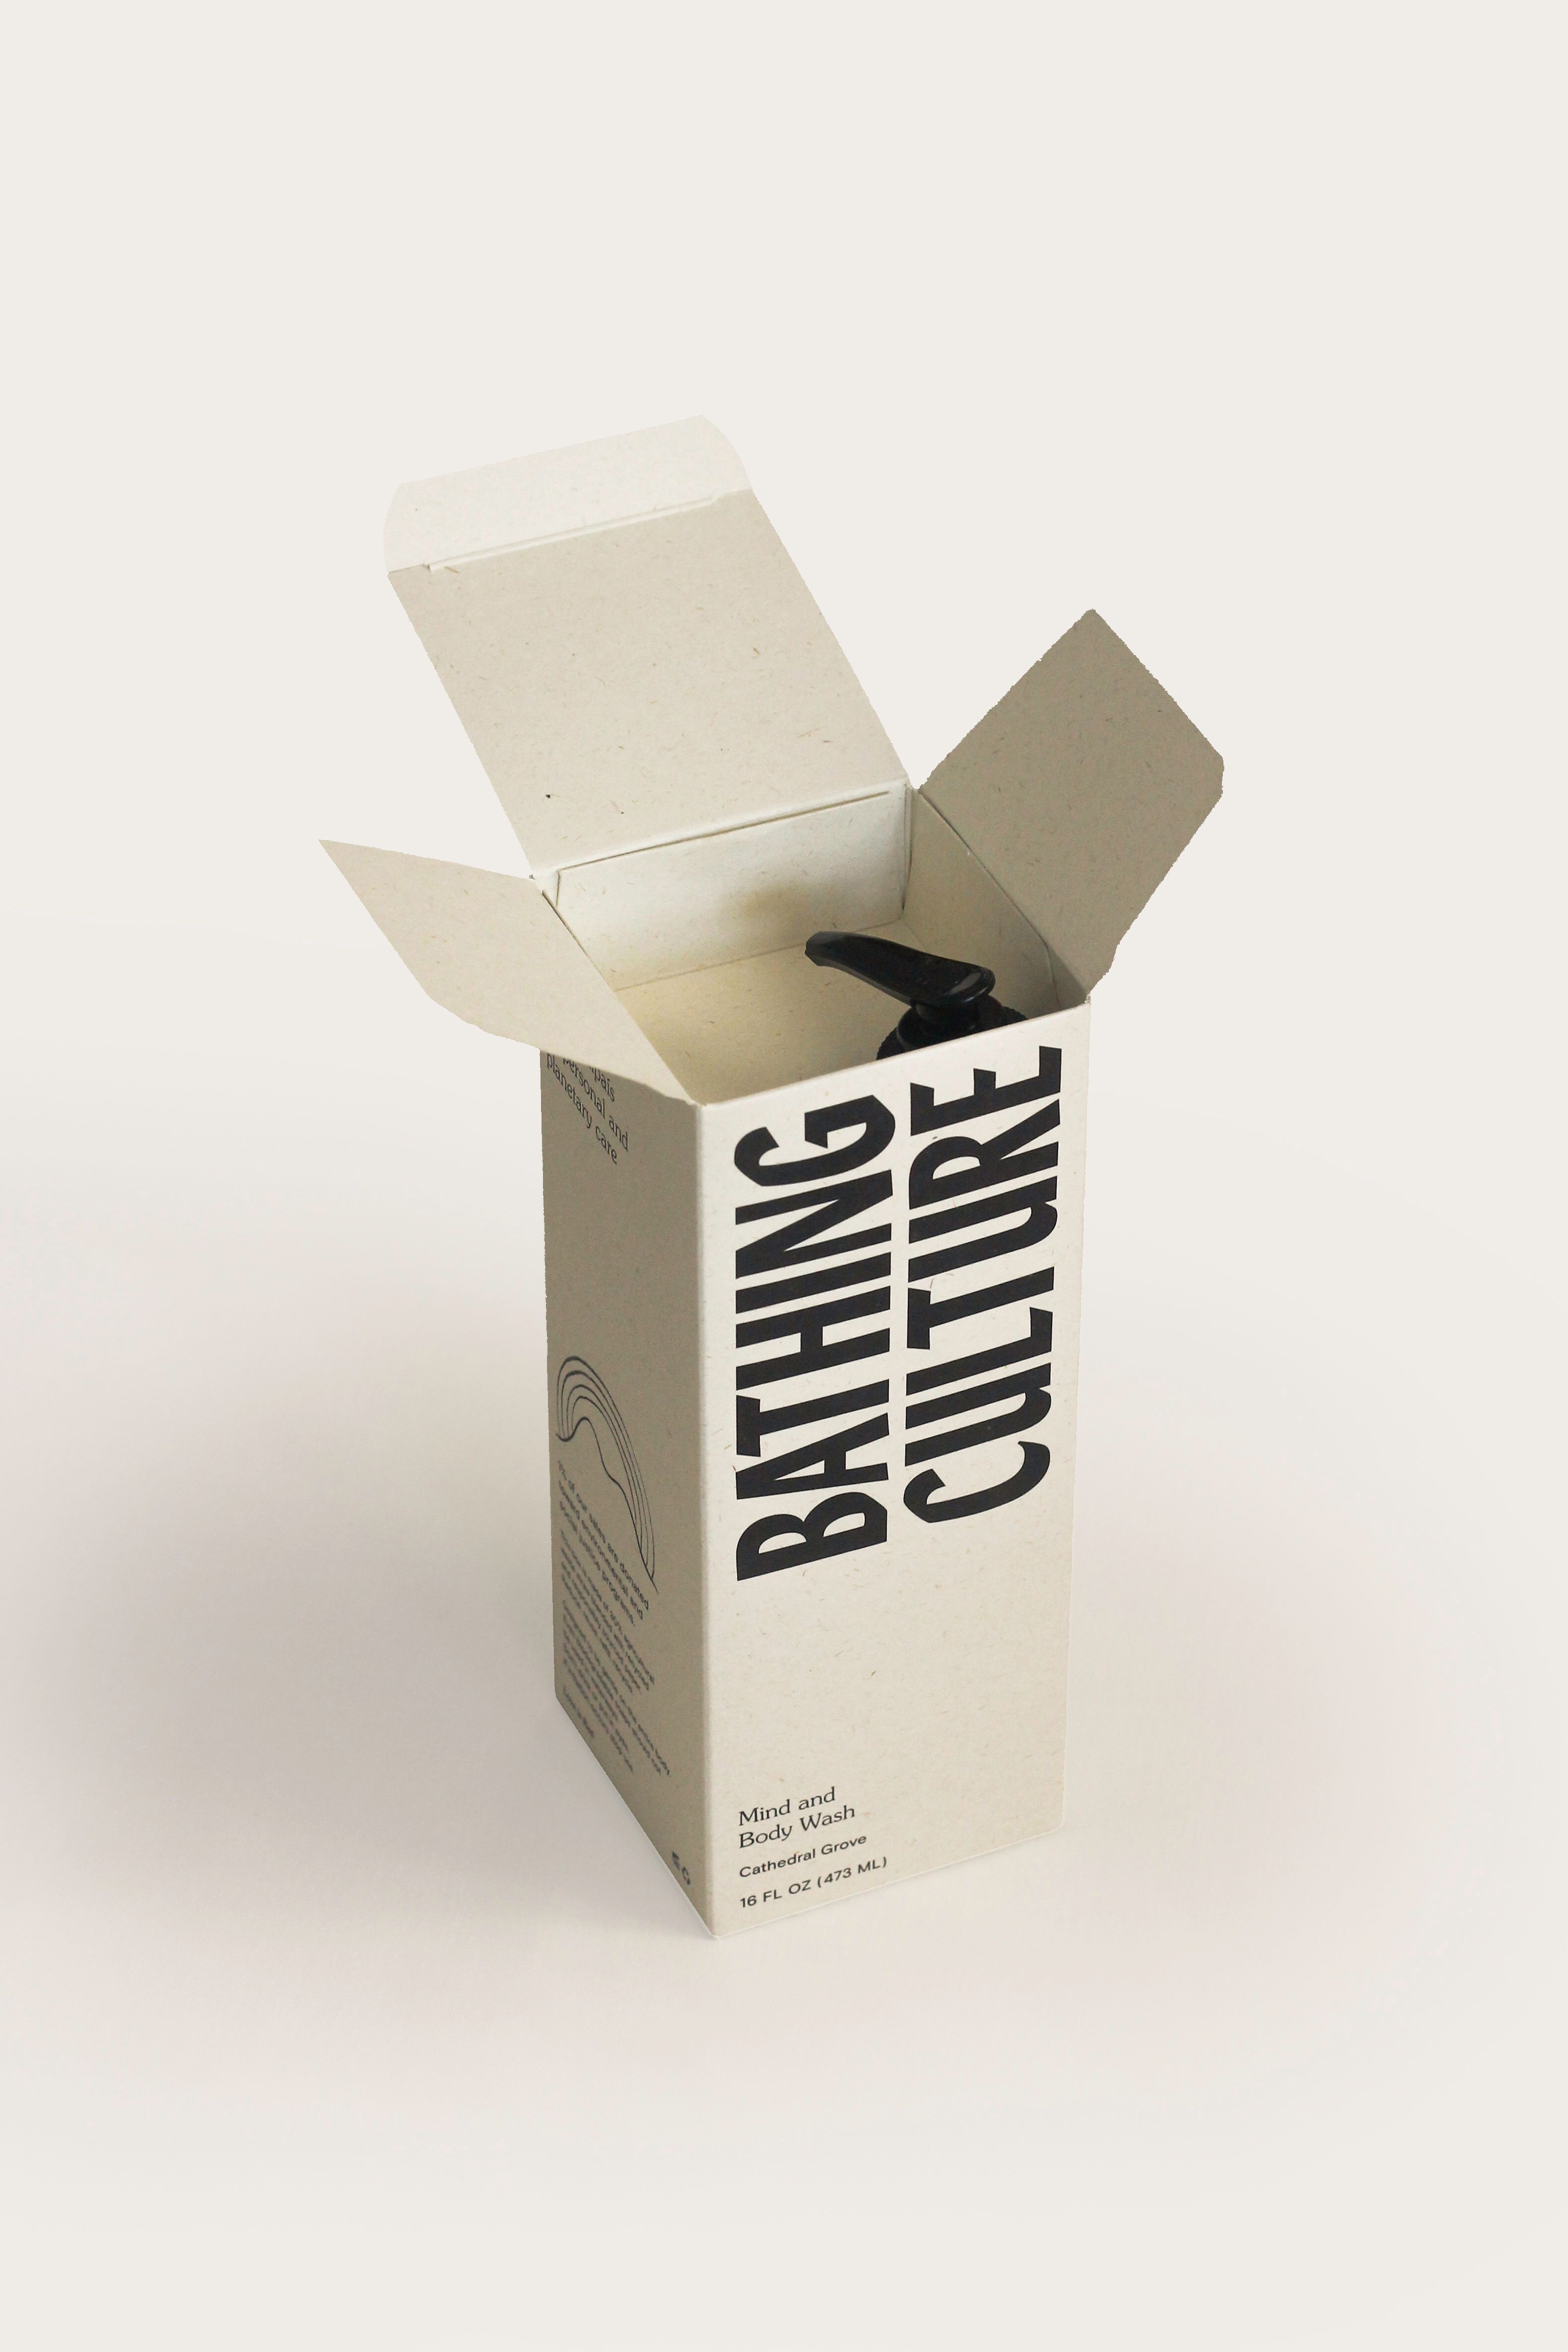 An open box from Bathing Culture